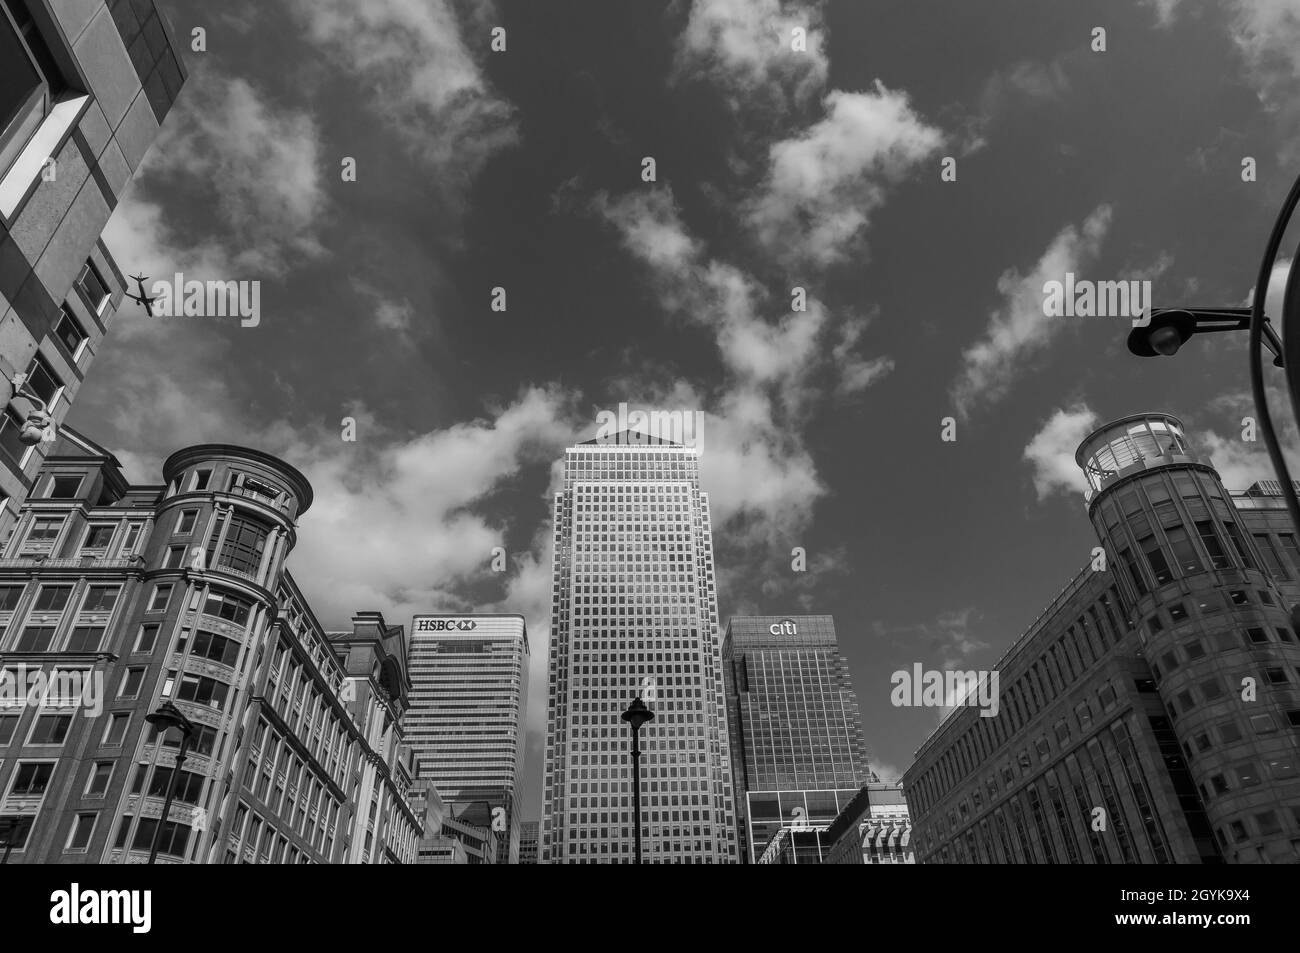 Low angle view of Canary Wharf skyscrapers Stock Photo